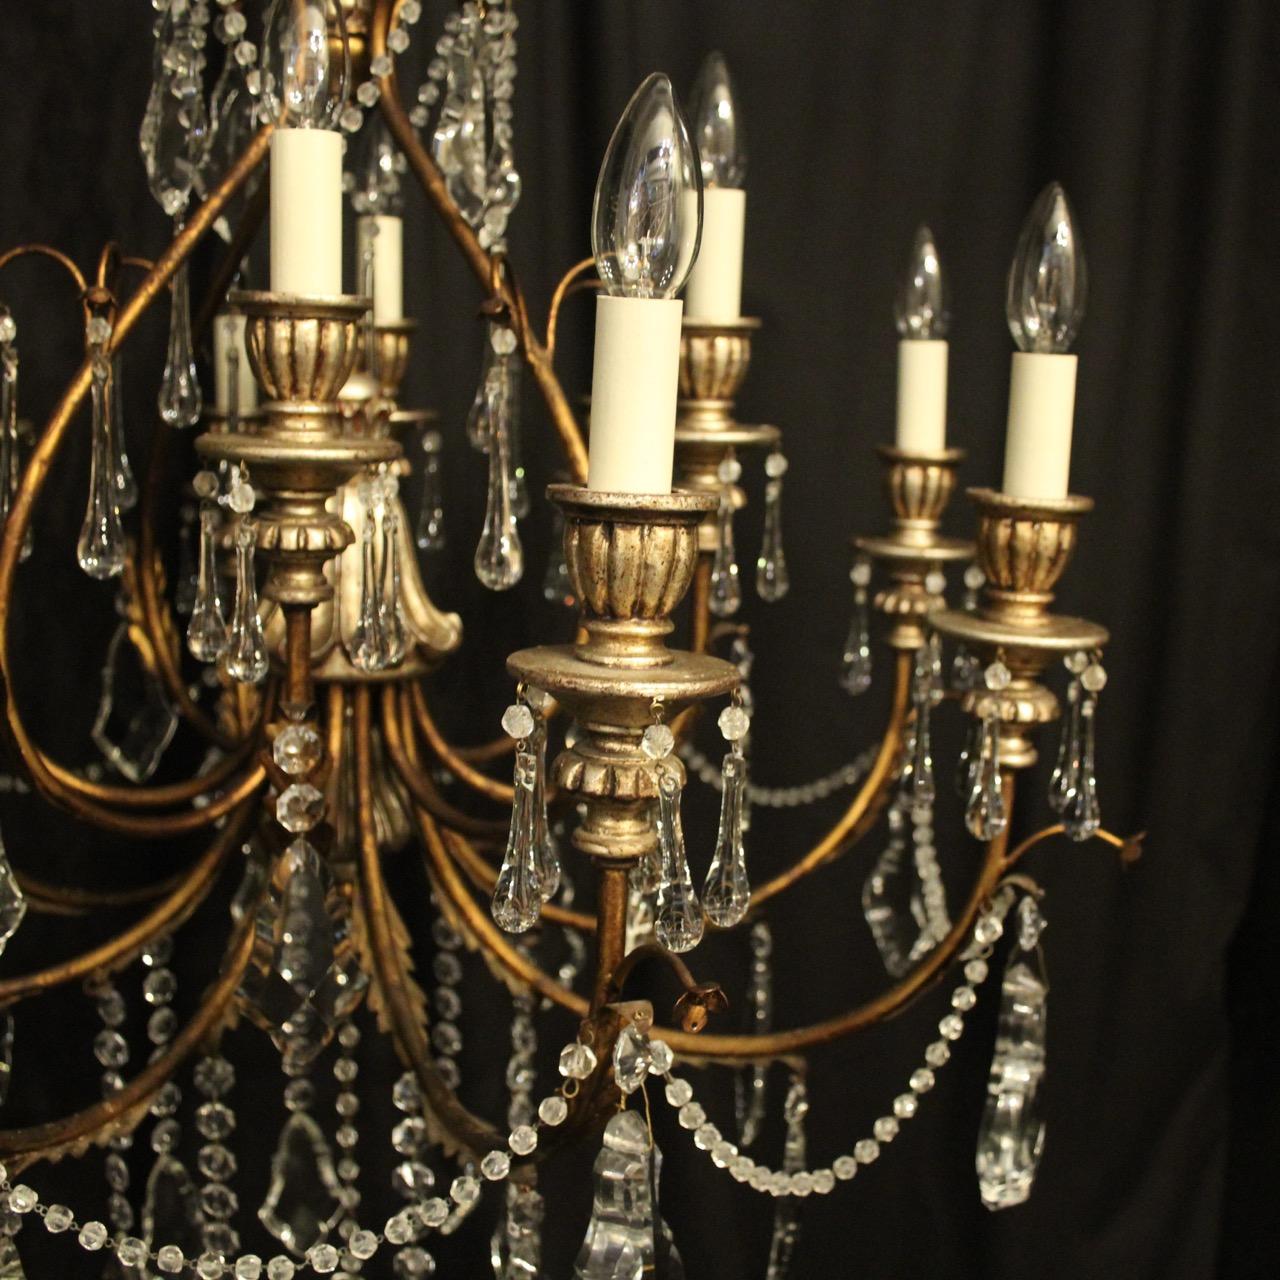 A decorative large Italian Florentine wooden silver polychrome and crystal 12-light double tiered chandelier, the Acanthus metal leaf scrolling arms with carved wooden reeded bulbous candle sconces, issuing from an elaborate open cage central column